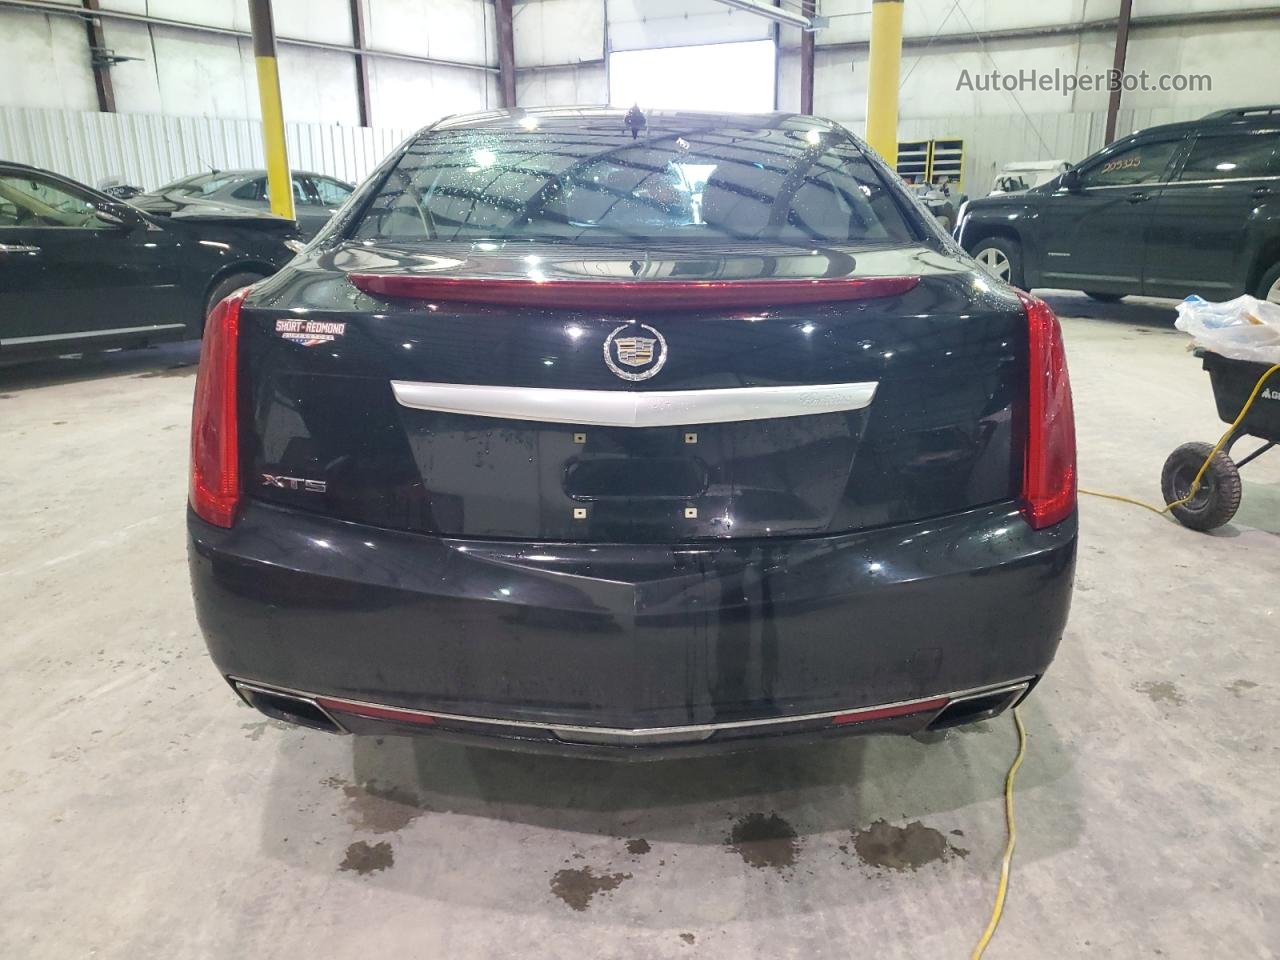 2013 Cadillac Xts Luxury Collection Black vin: 2G61P5S36D9101496